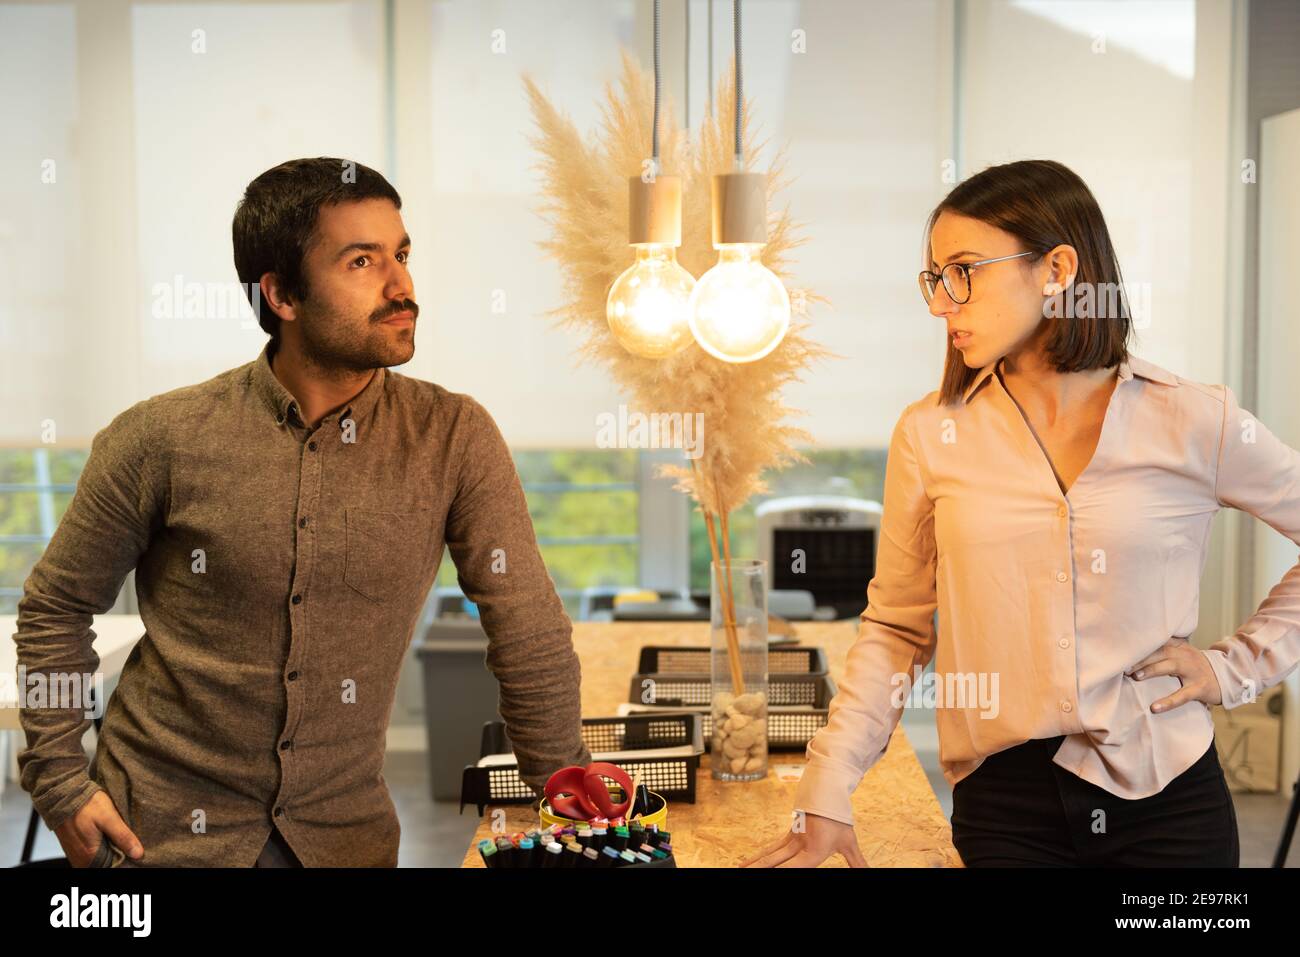 Informal chat of two hispanic coworkers while bulbs lighten them. Stock Photo